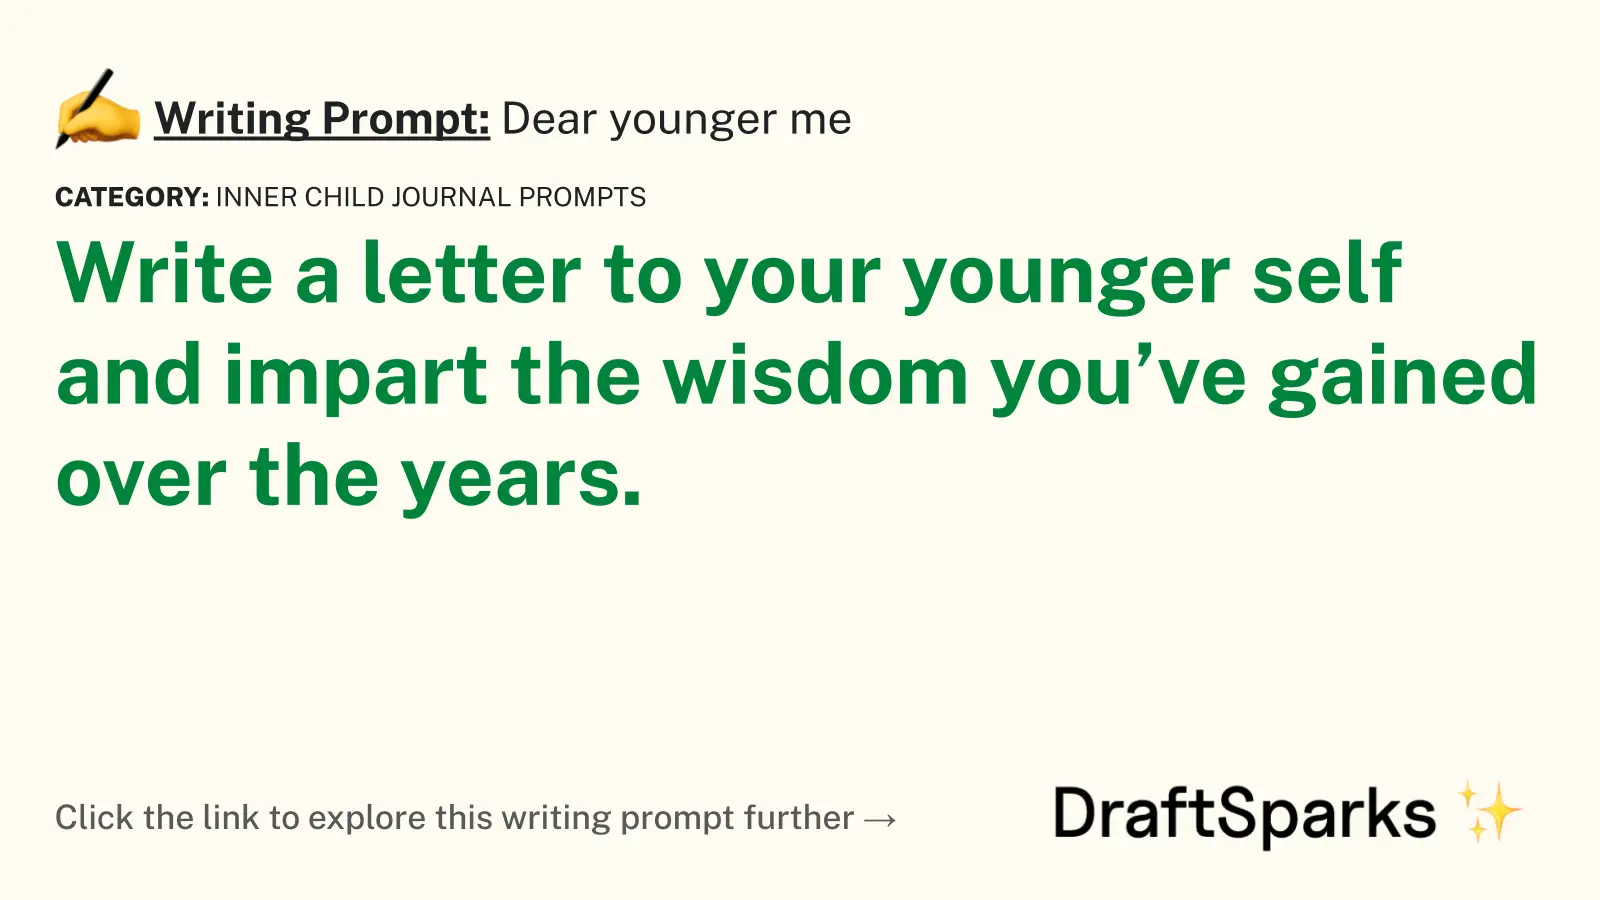 Dear younger me